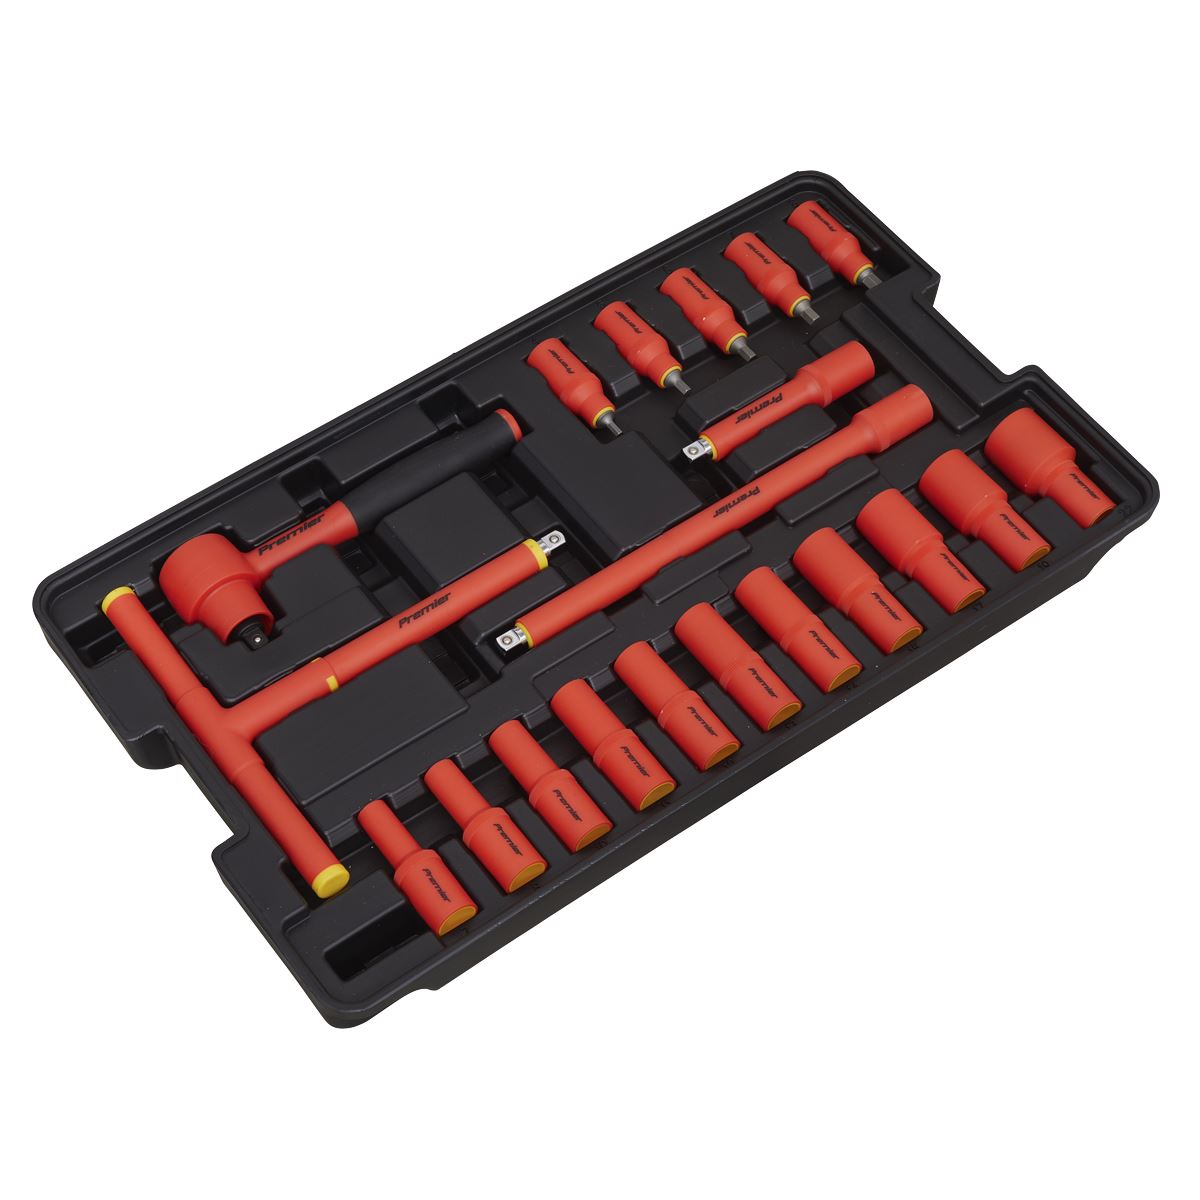 Sealey Premier 1000V Insulated Tool Kit 3/8"Sq Drive 50pc